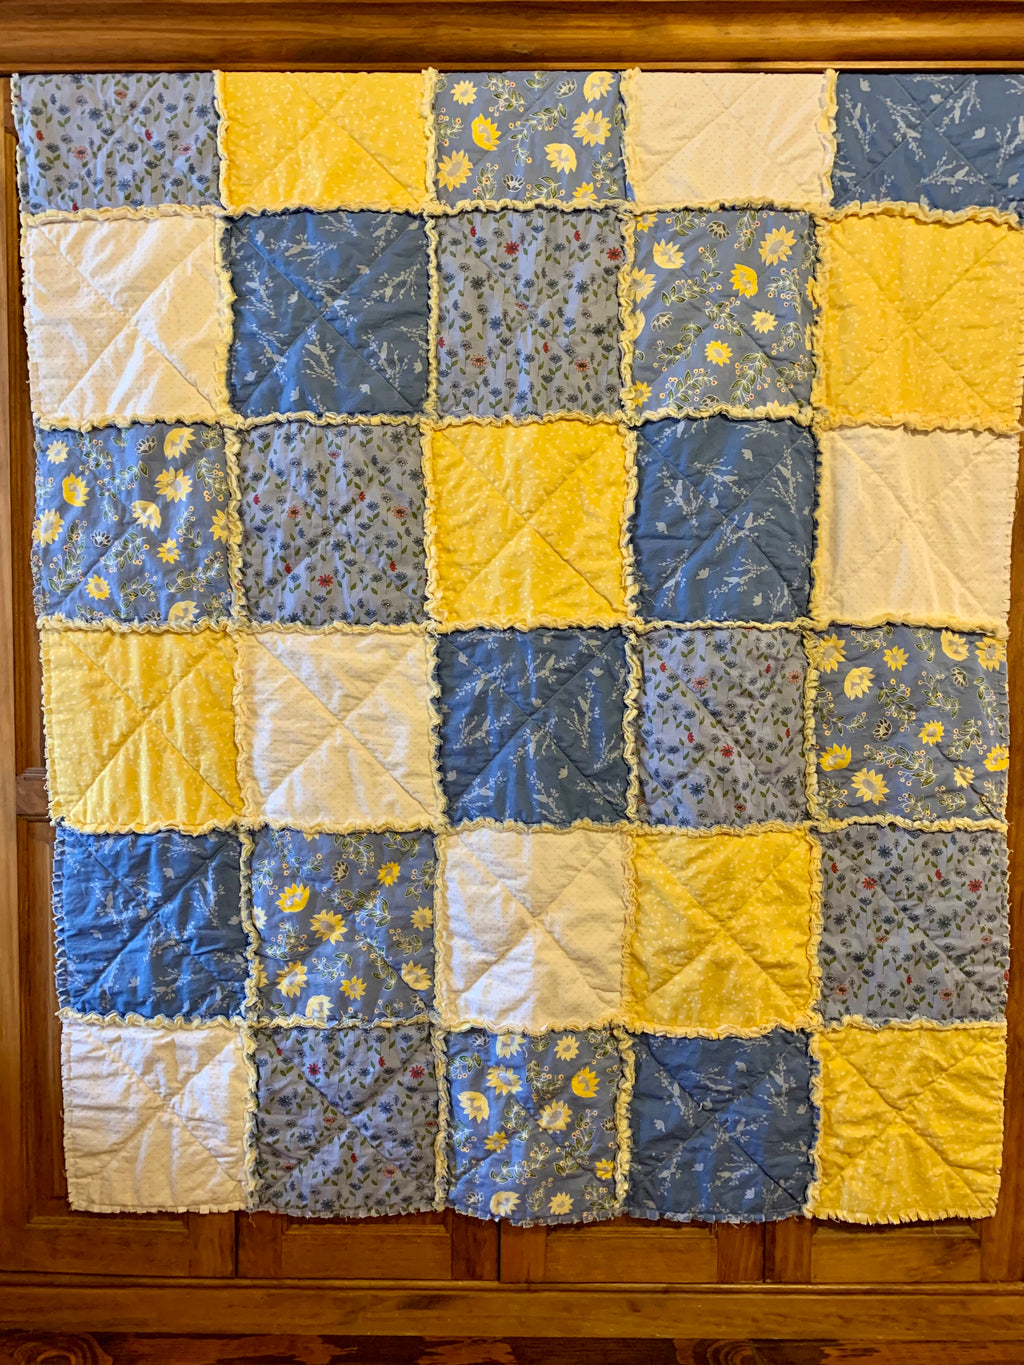 Yellow & Blue Child's Quilt 45"x55"